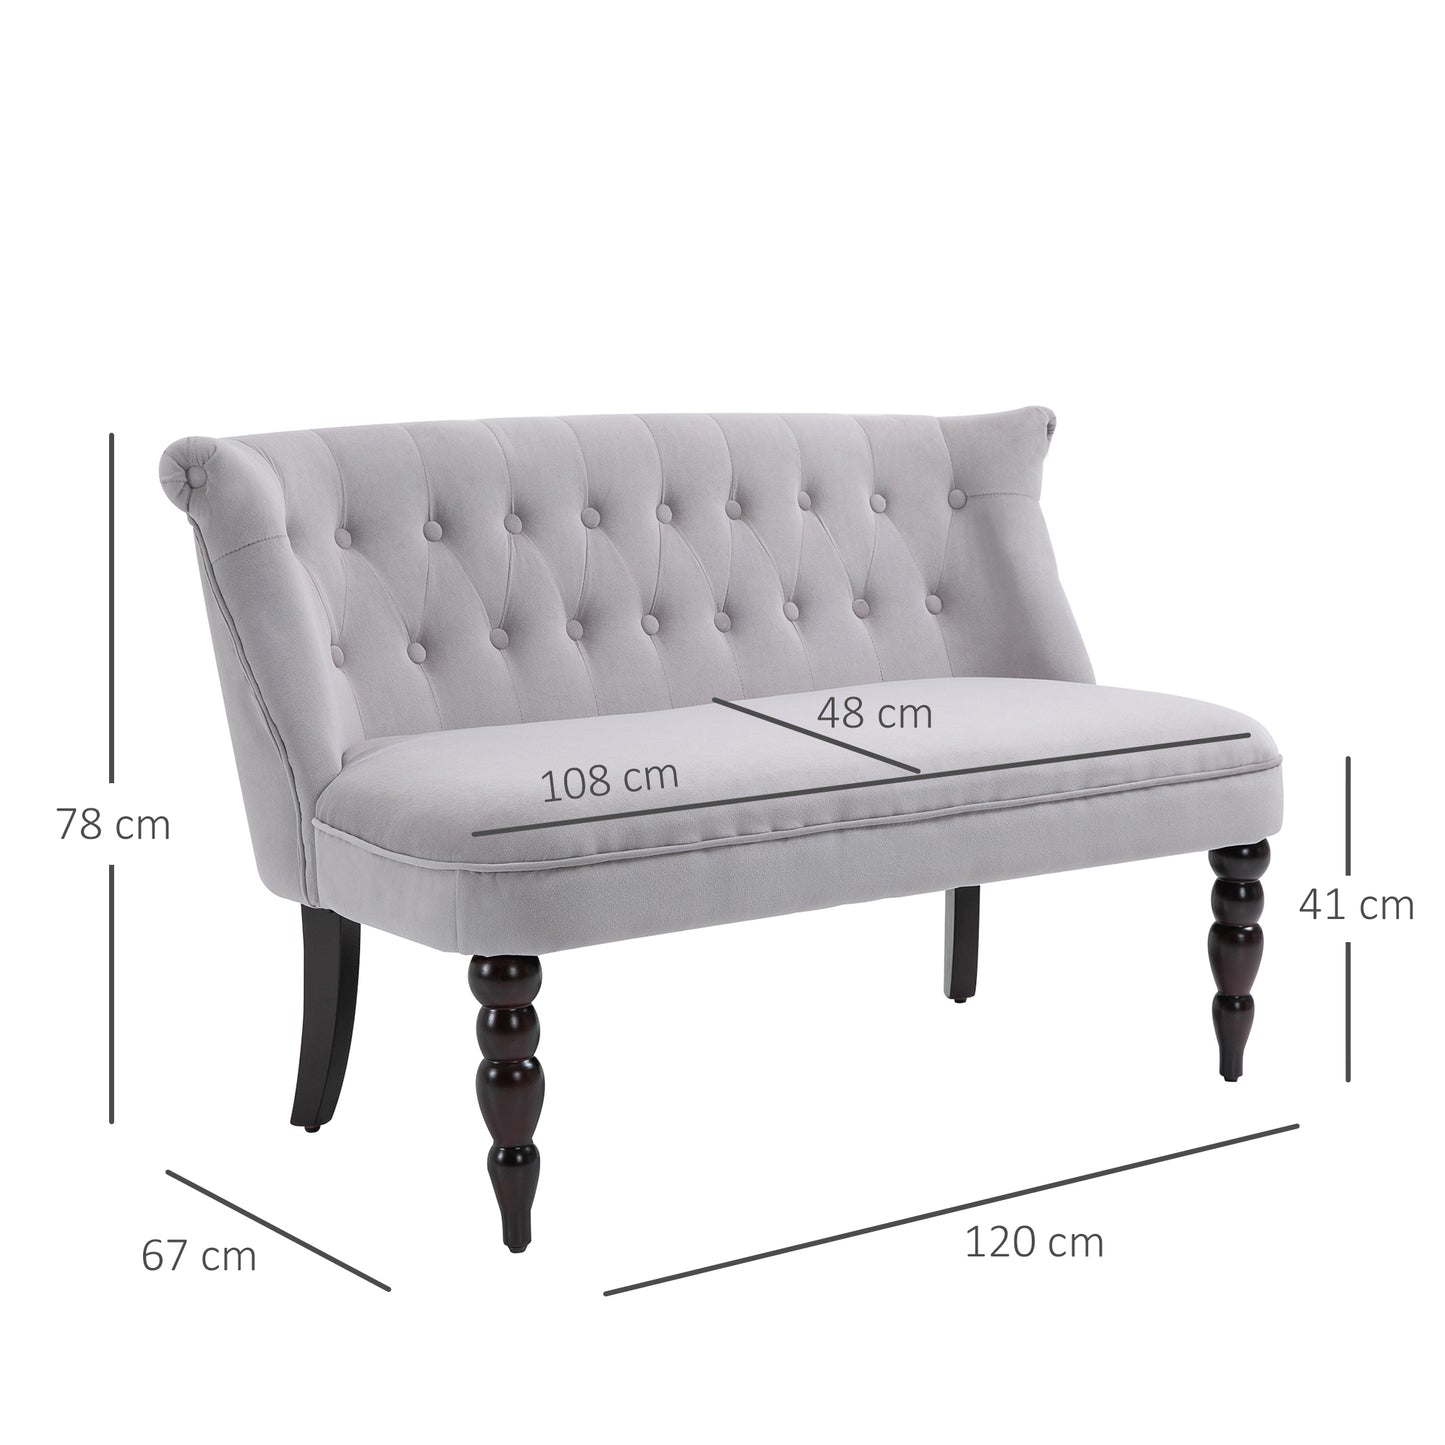 HOMCOM Vintage Armless Button-Tufted Fabric Loveseat 2 Seat Sofa Couch